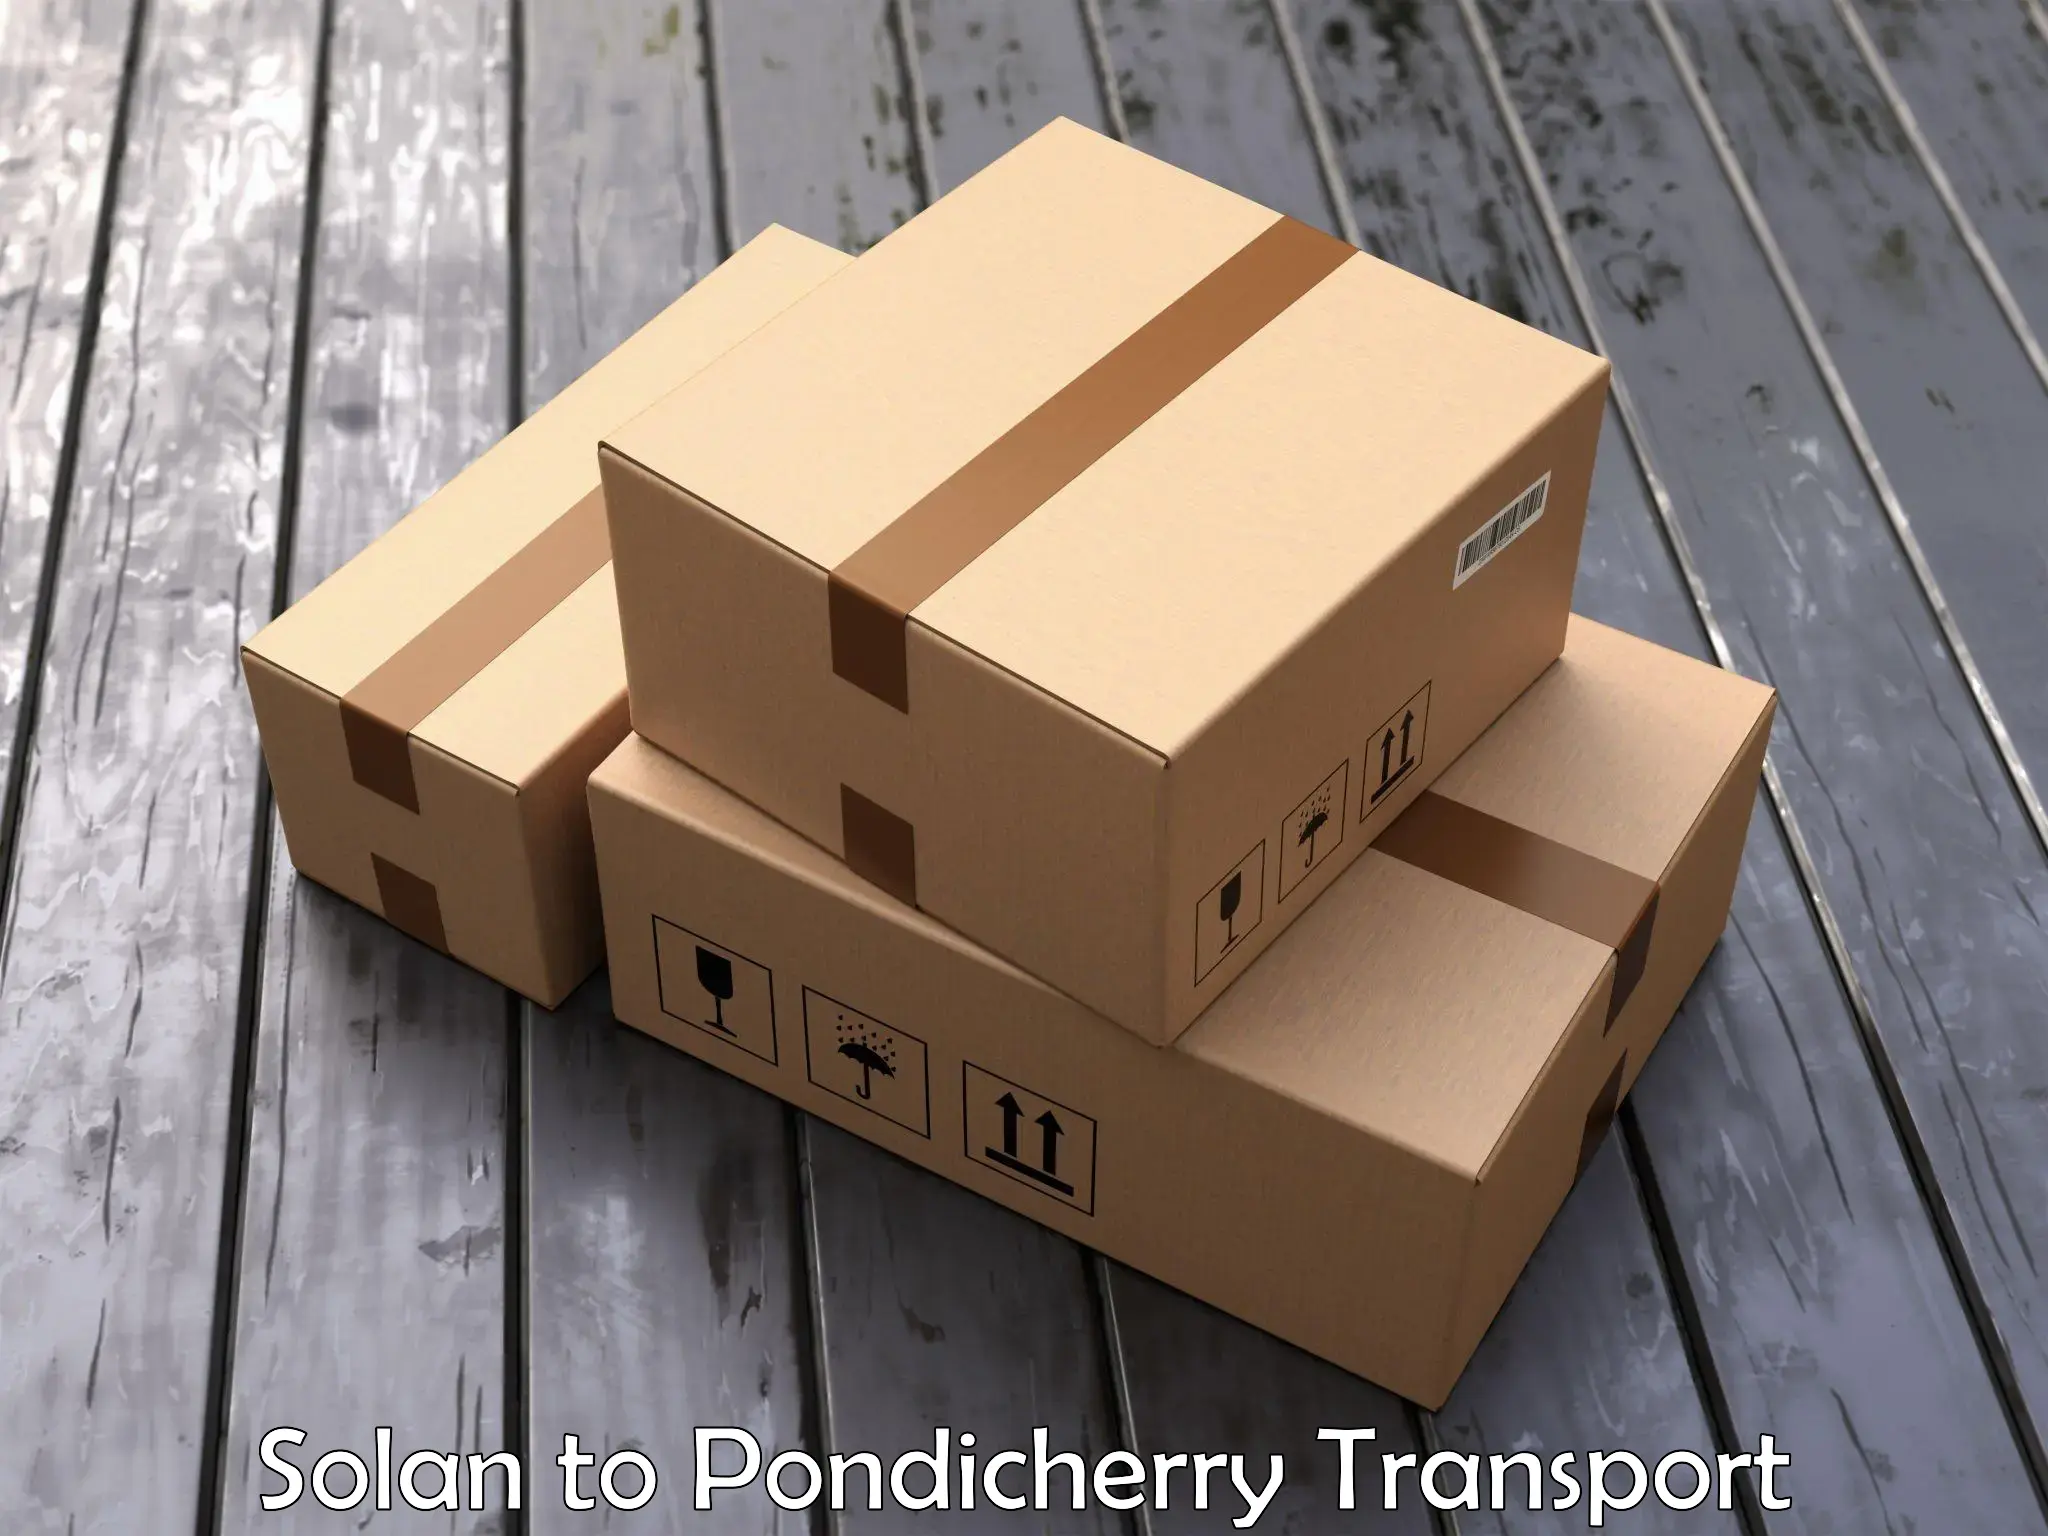 Commercial transport service Solan to Pondicherry